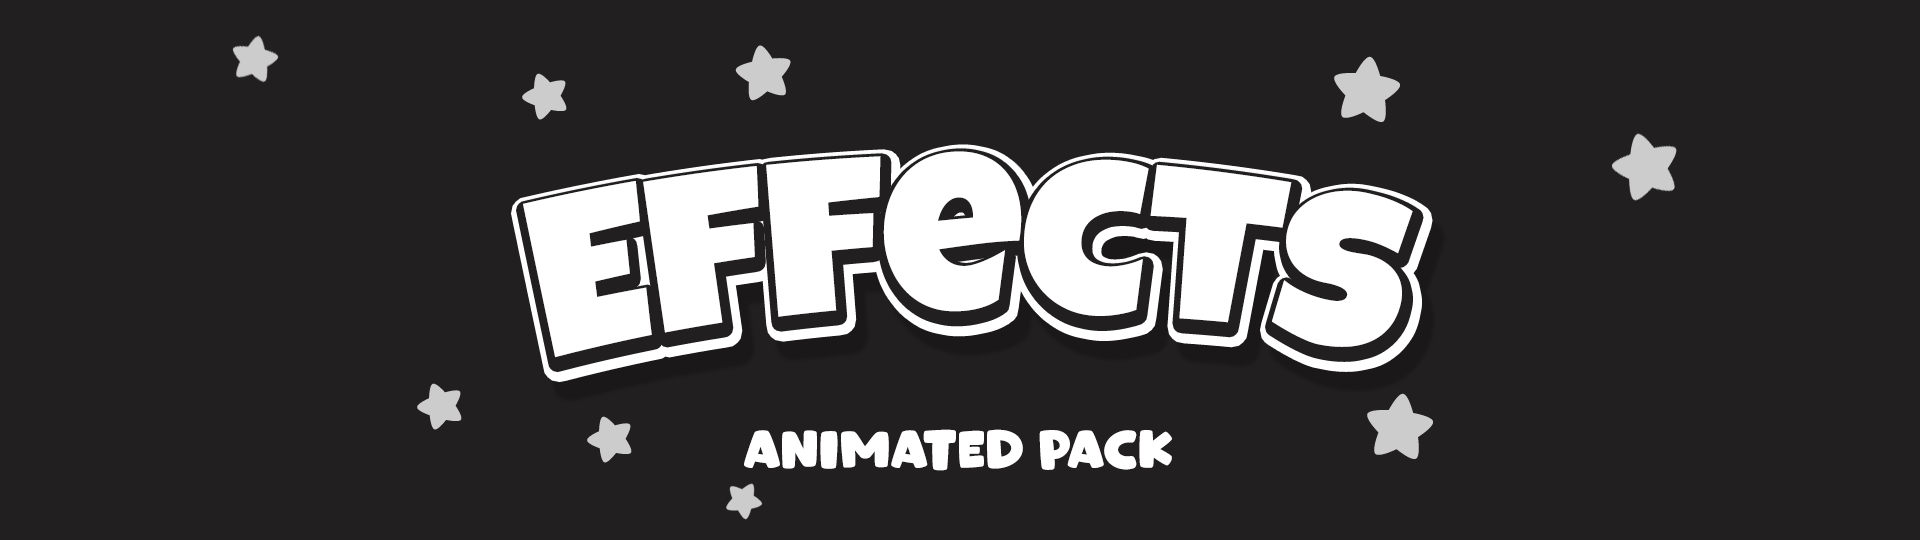 50 Animated Effects